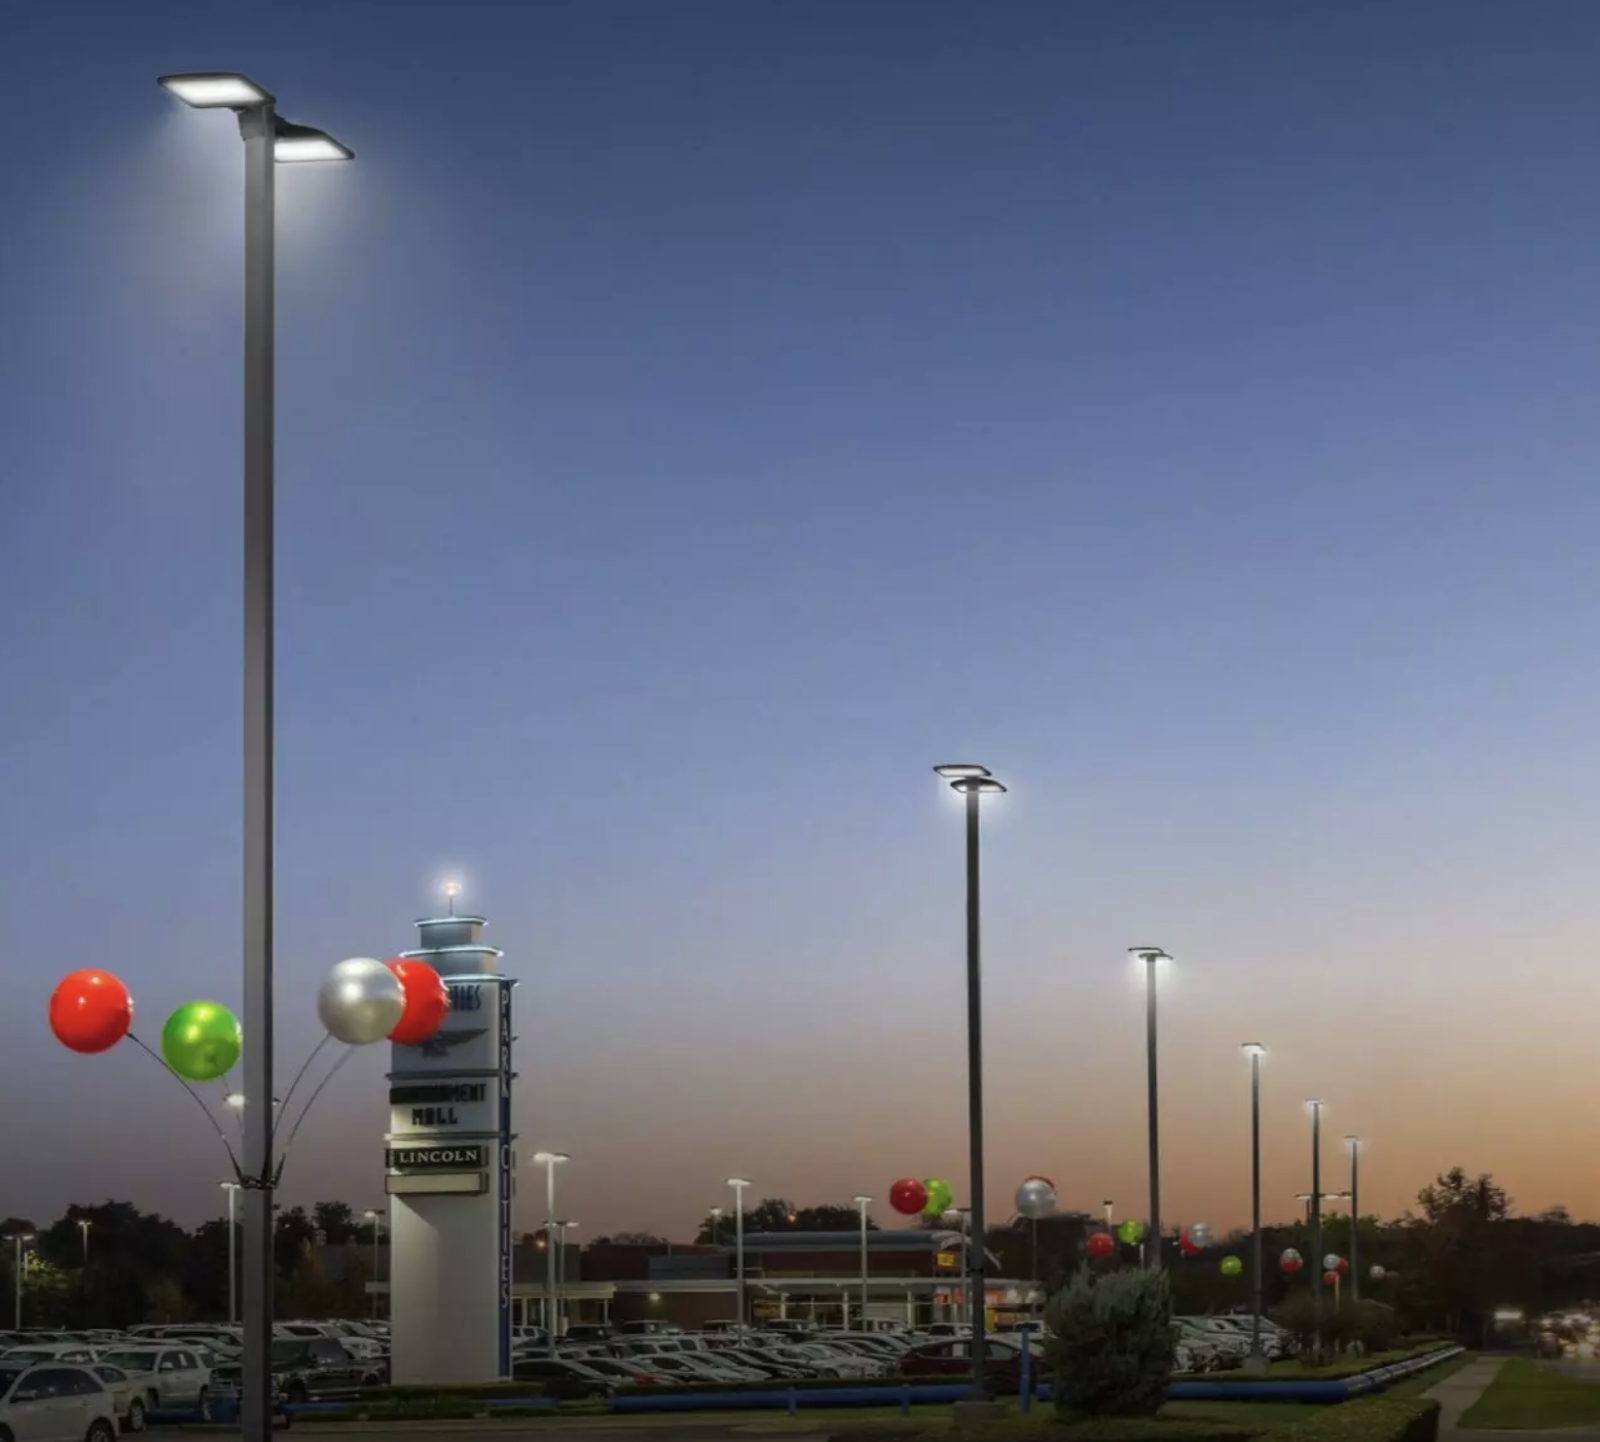 A Buyer's Guide to LED Parking Lot Lights: What to Look For?